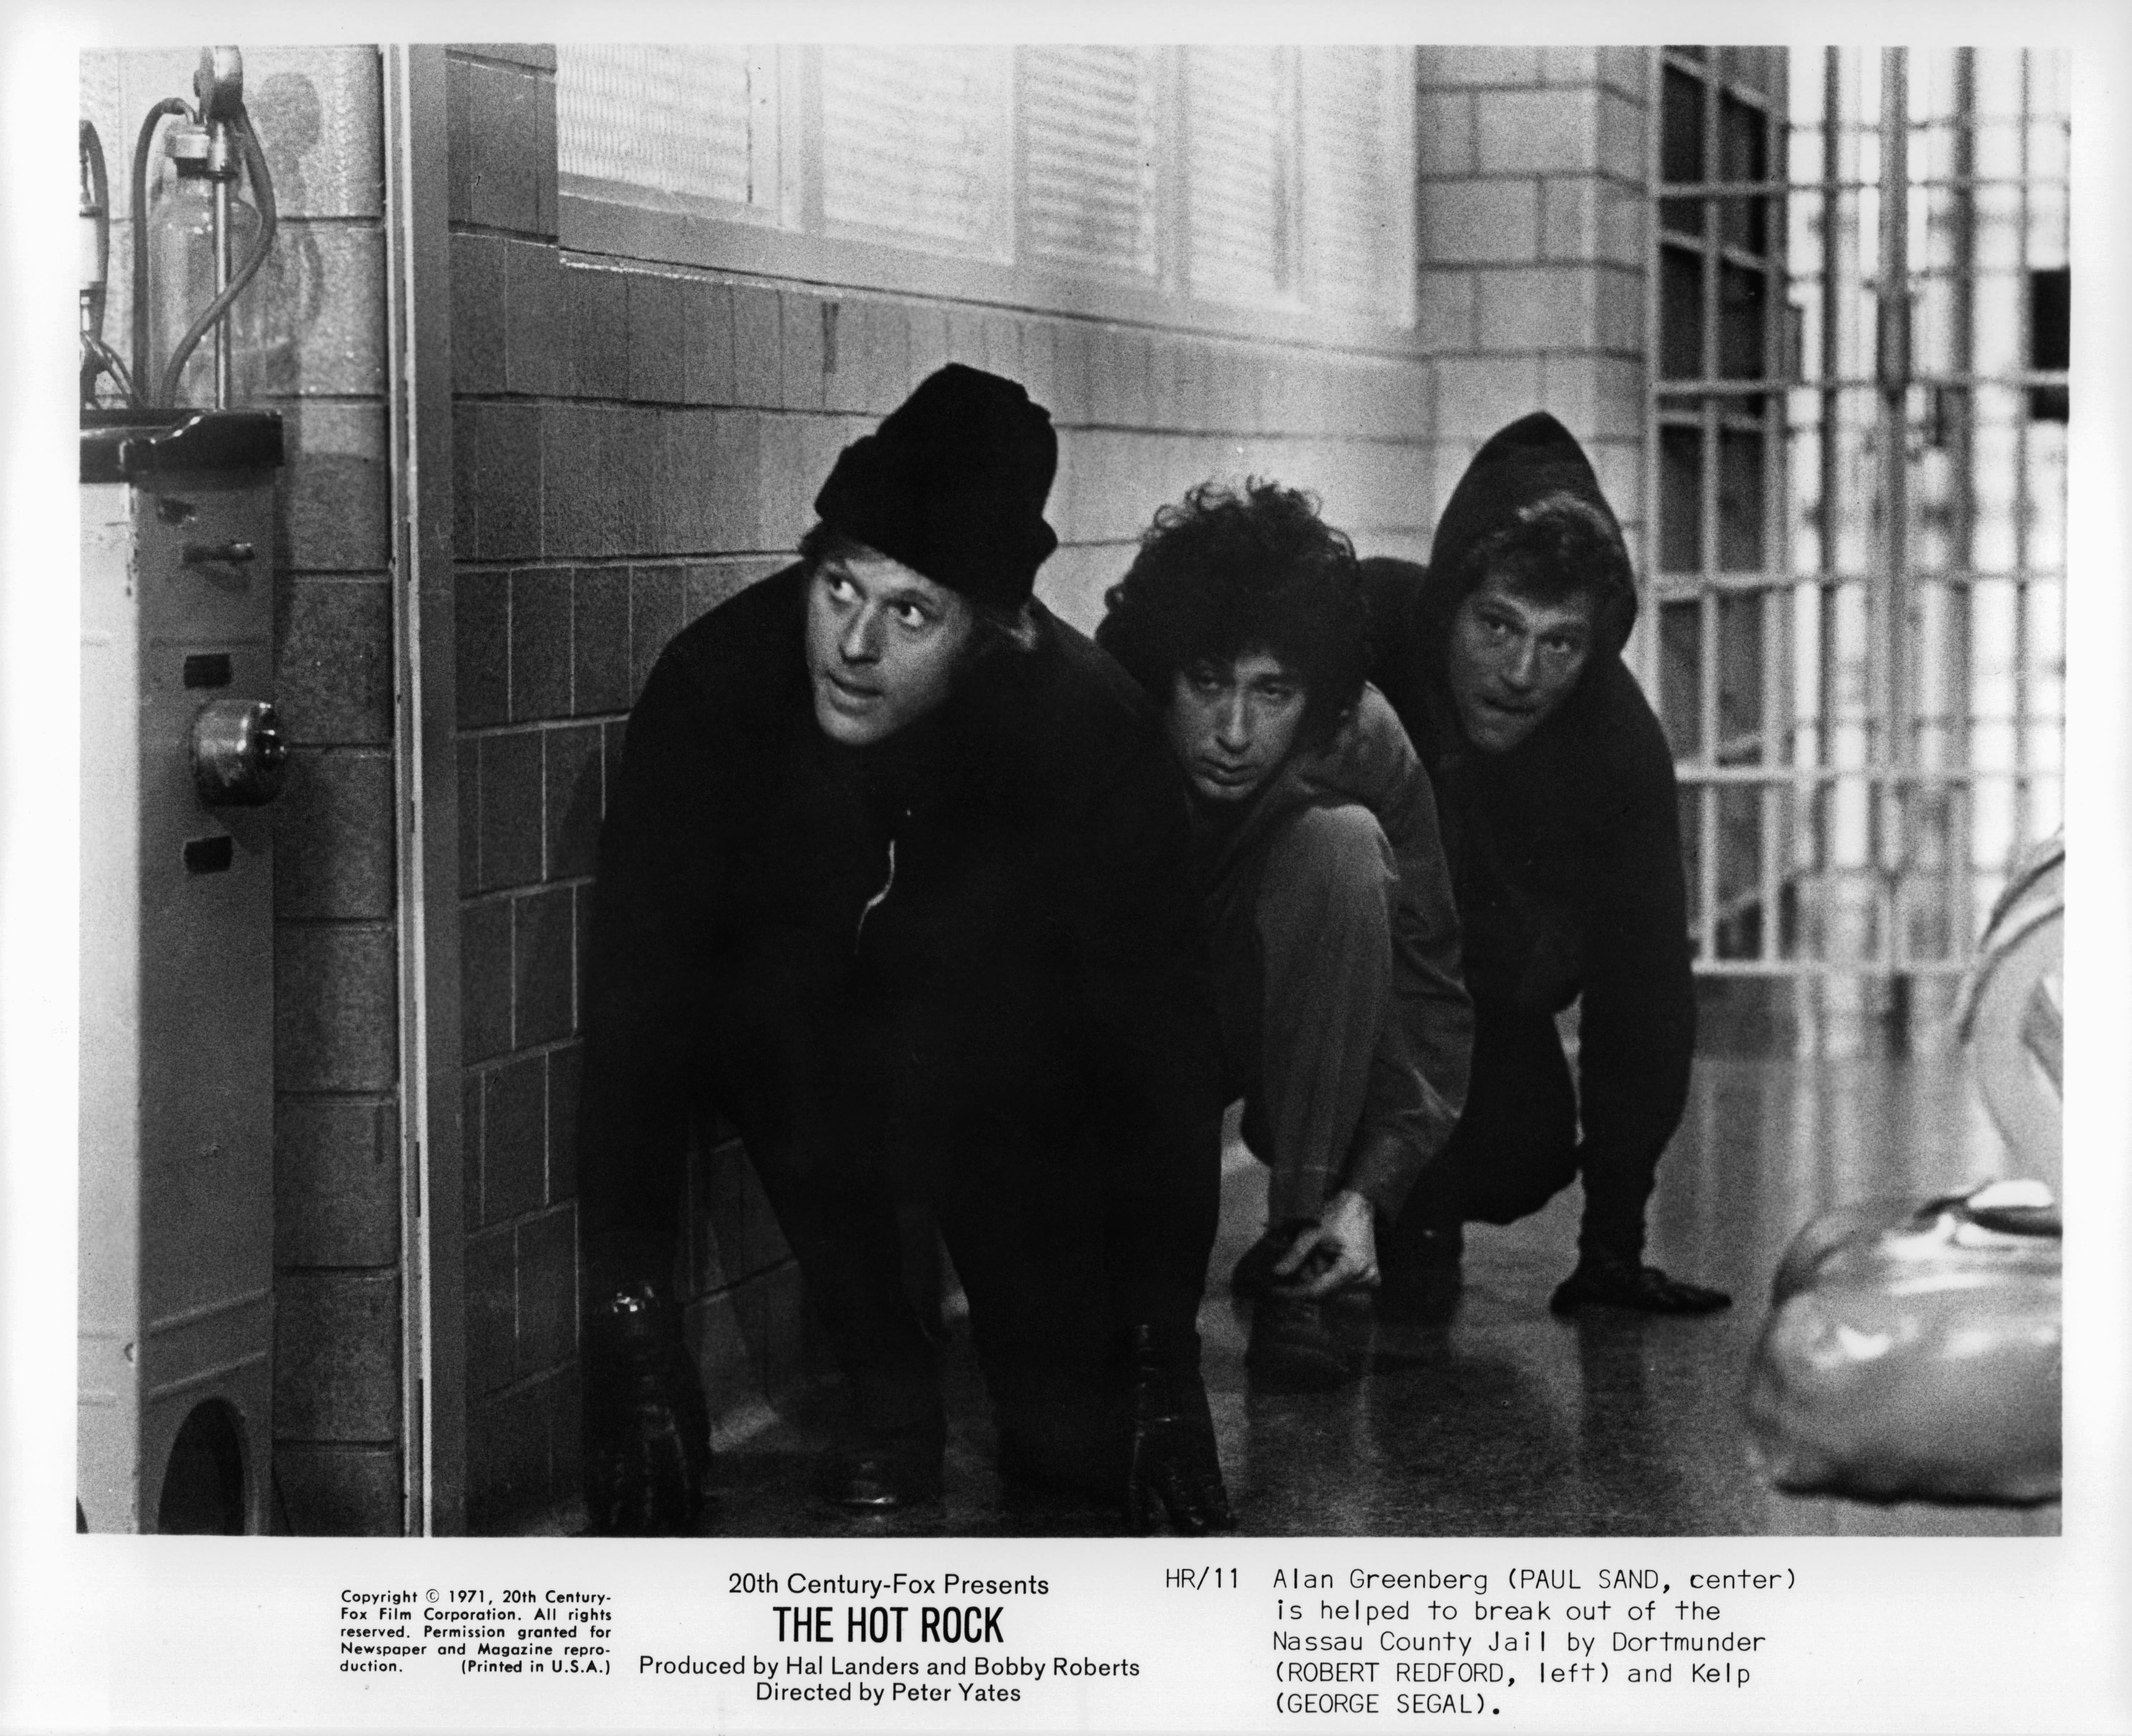 Still of Robert Redford, George Segal and Paul Sand in The Hot Rock (1972)